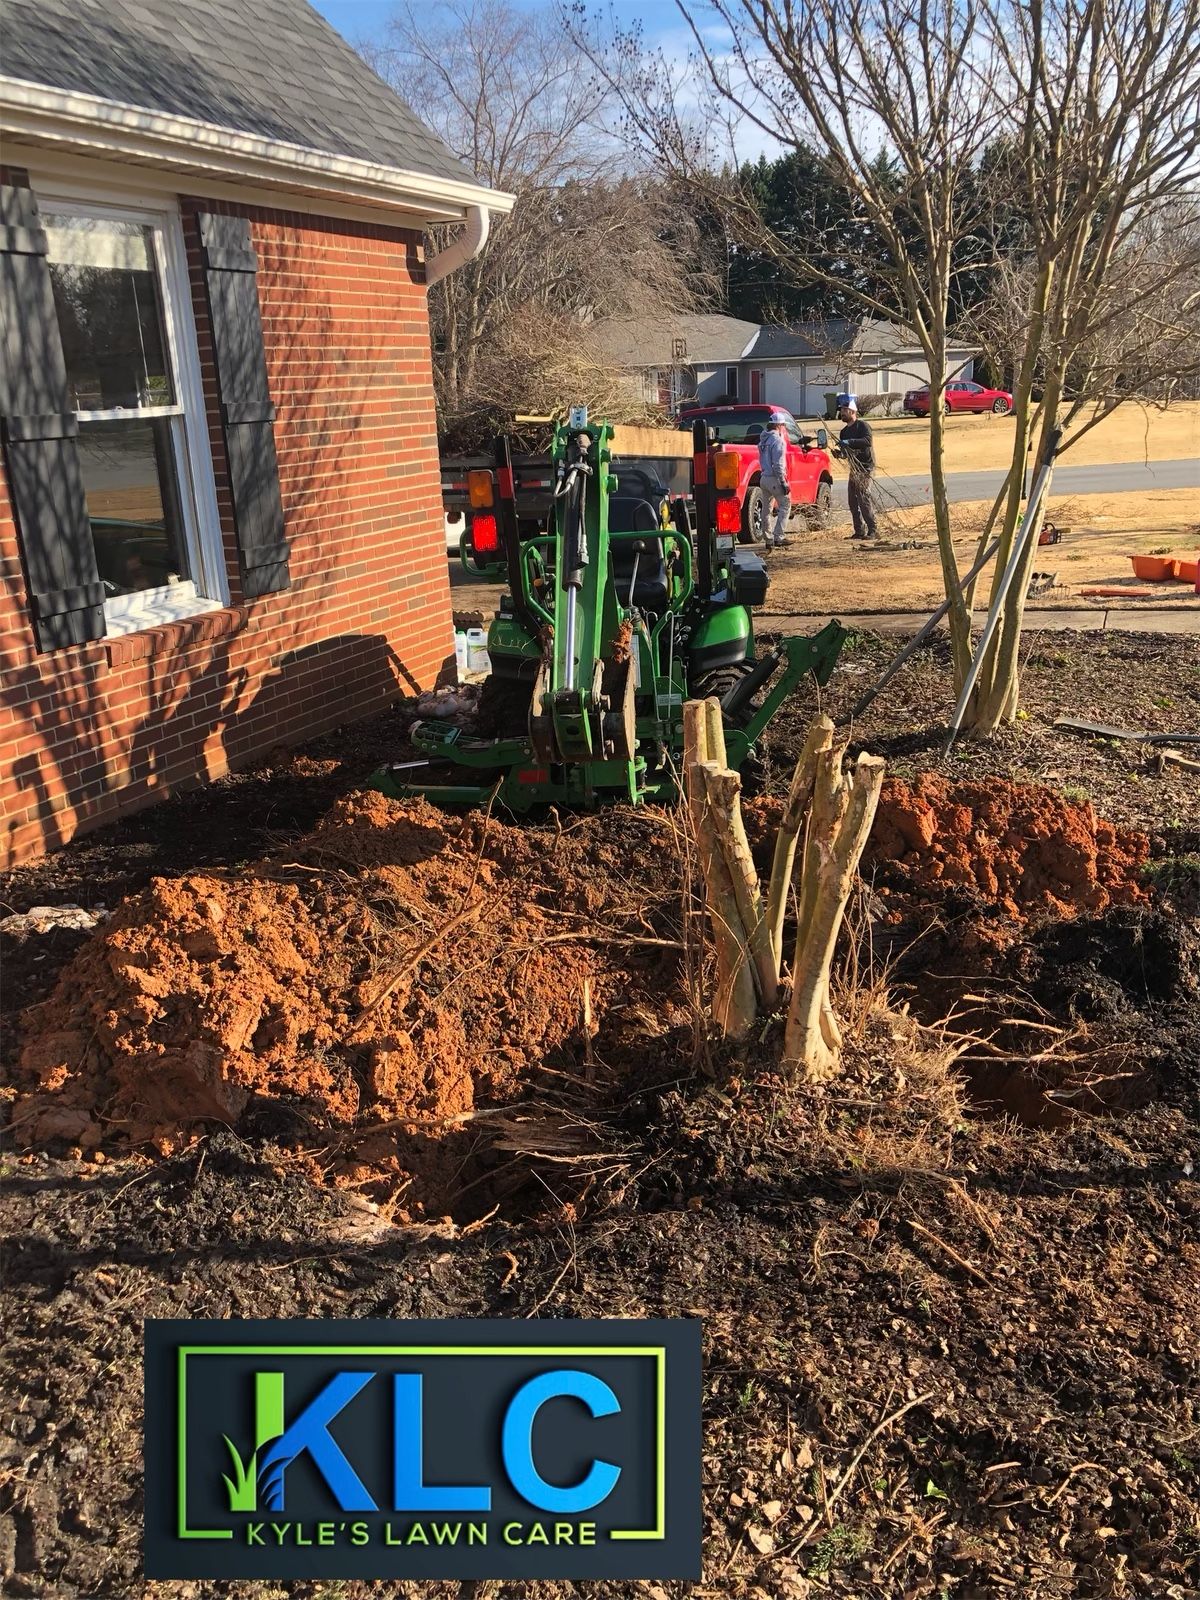 Lawn Service for Kyle's Lawn Care in Kernersville, NC